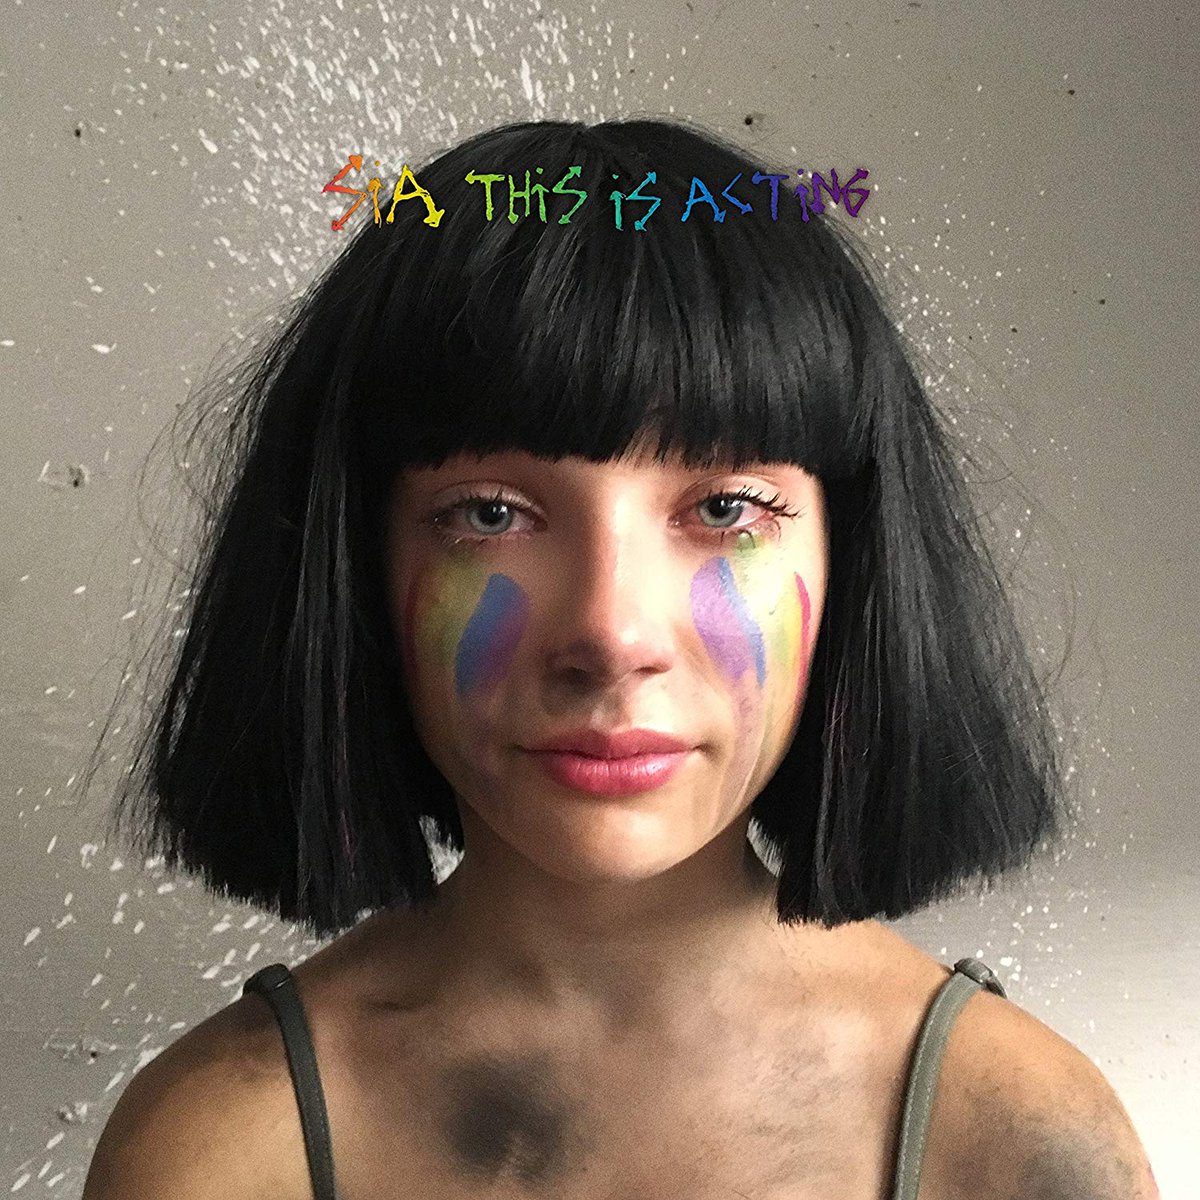 Sia has been working within the music industry for well over 25 years now, from debuting within a girl group to releasing several solo studio albums, with her most recent albums 1000 Forms of Fear and This Is Acting being her most popular, among with her side-project LSD.